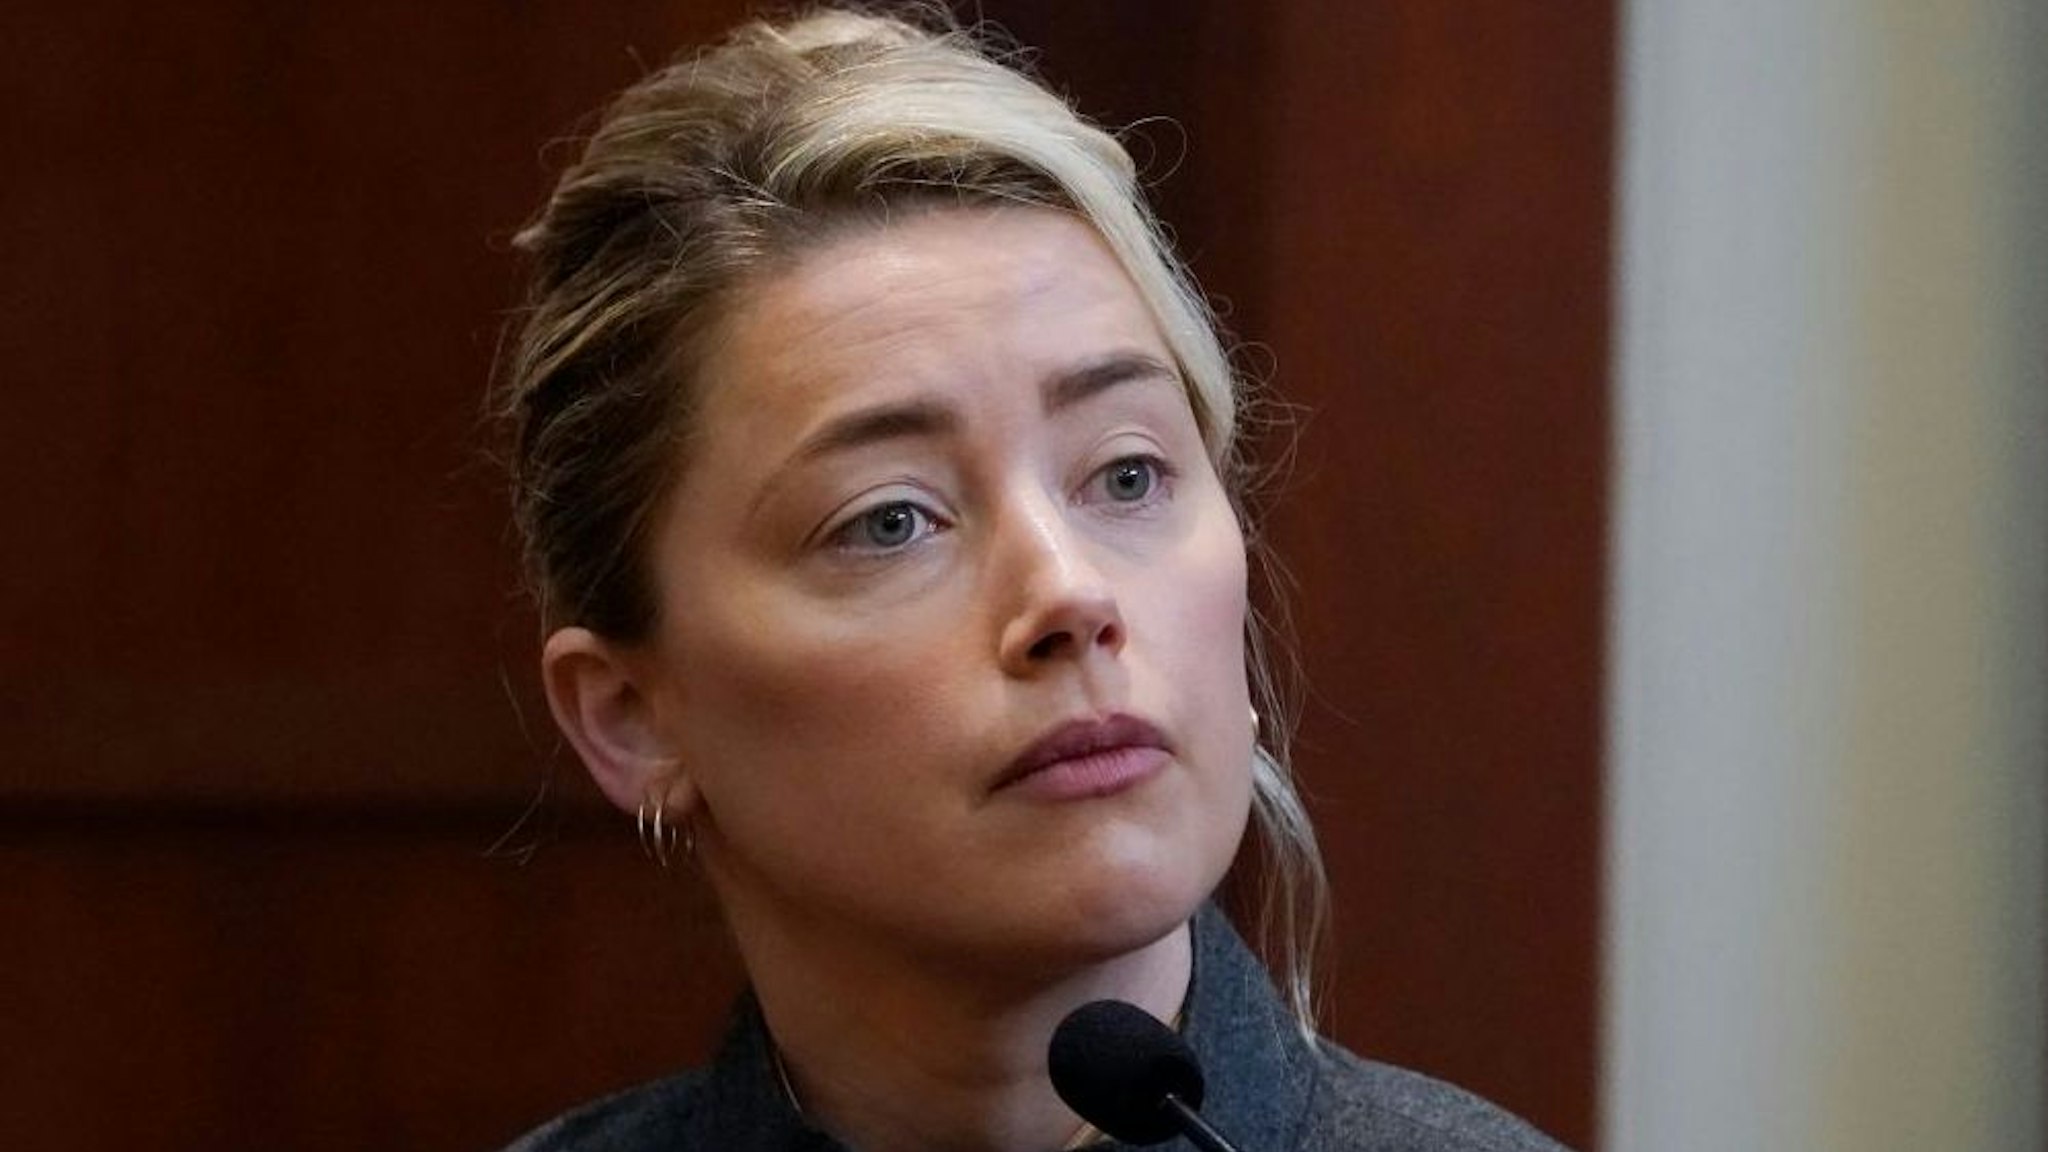 Actor Amber Heard testifies in the courtroom at the Fairfax County Circuit Courthouse in Fairfax, Virginia, on May 16, 2022.